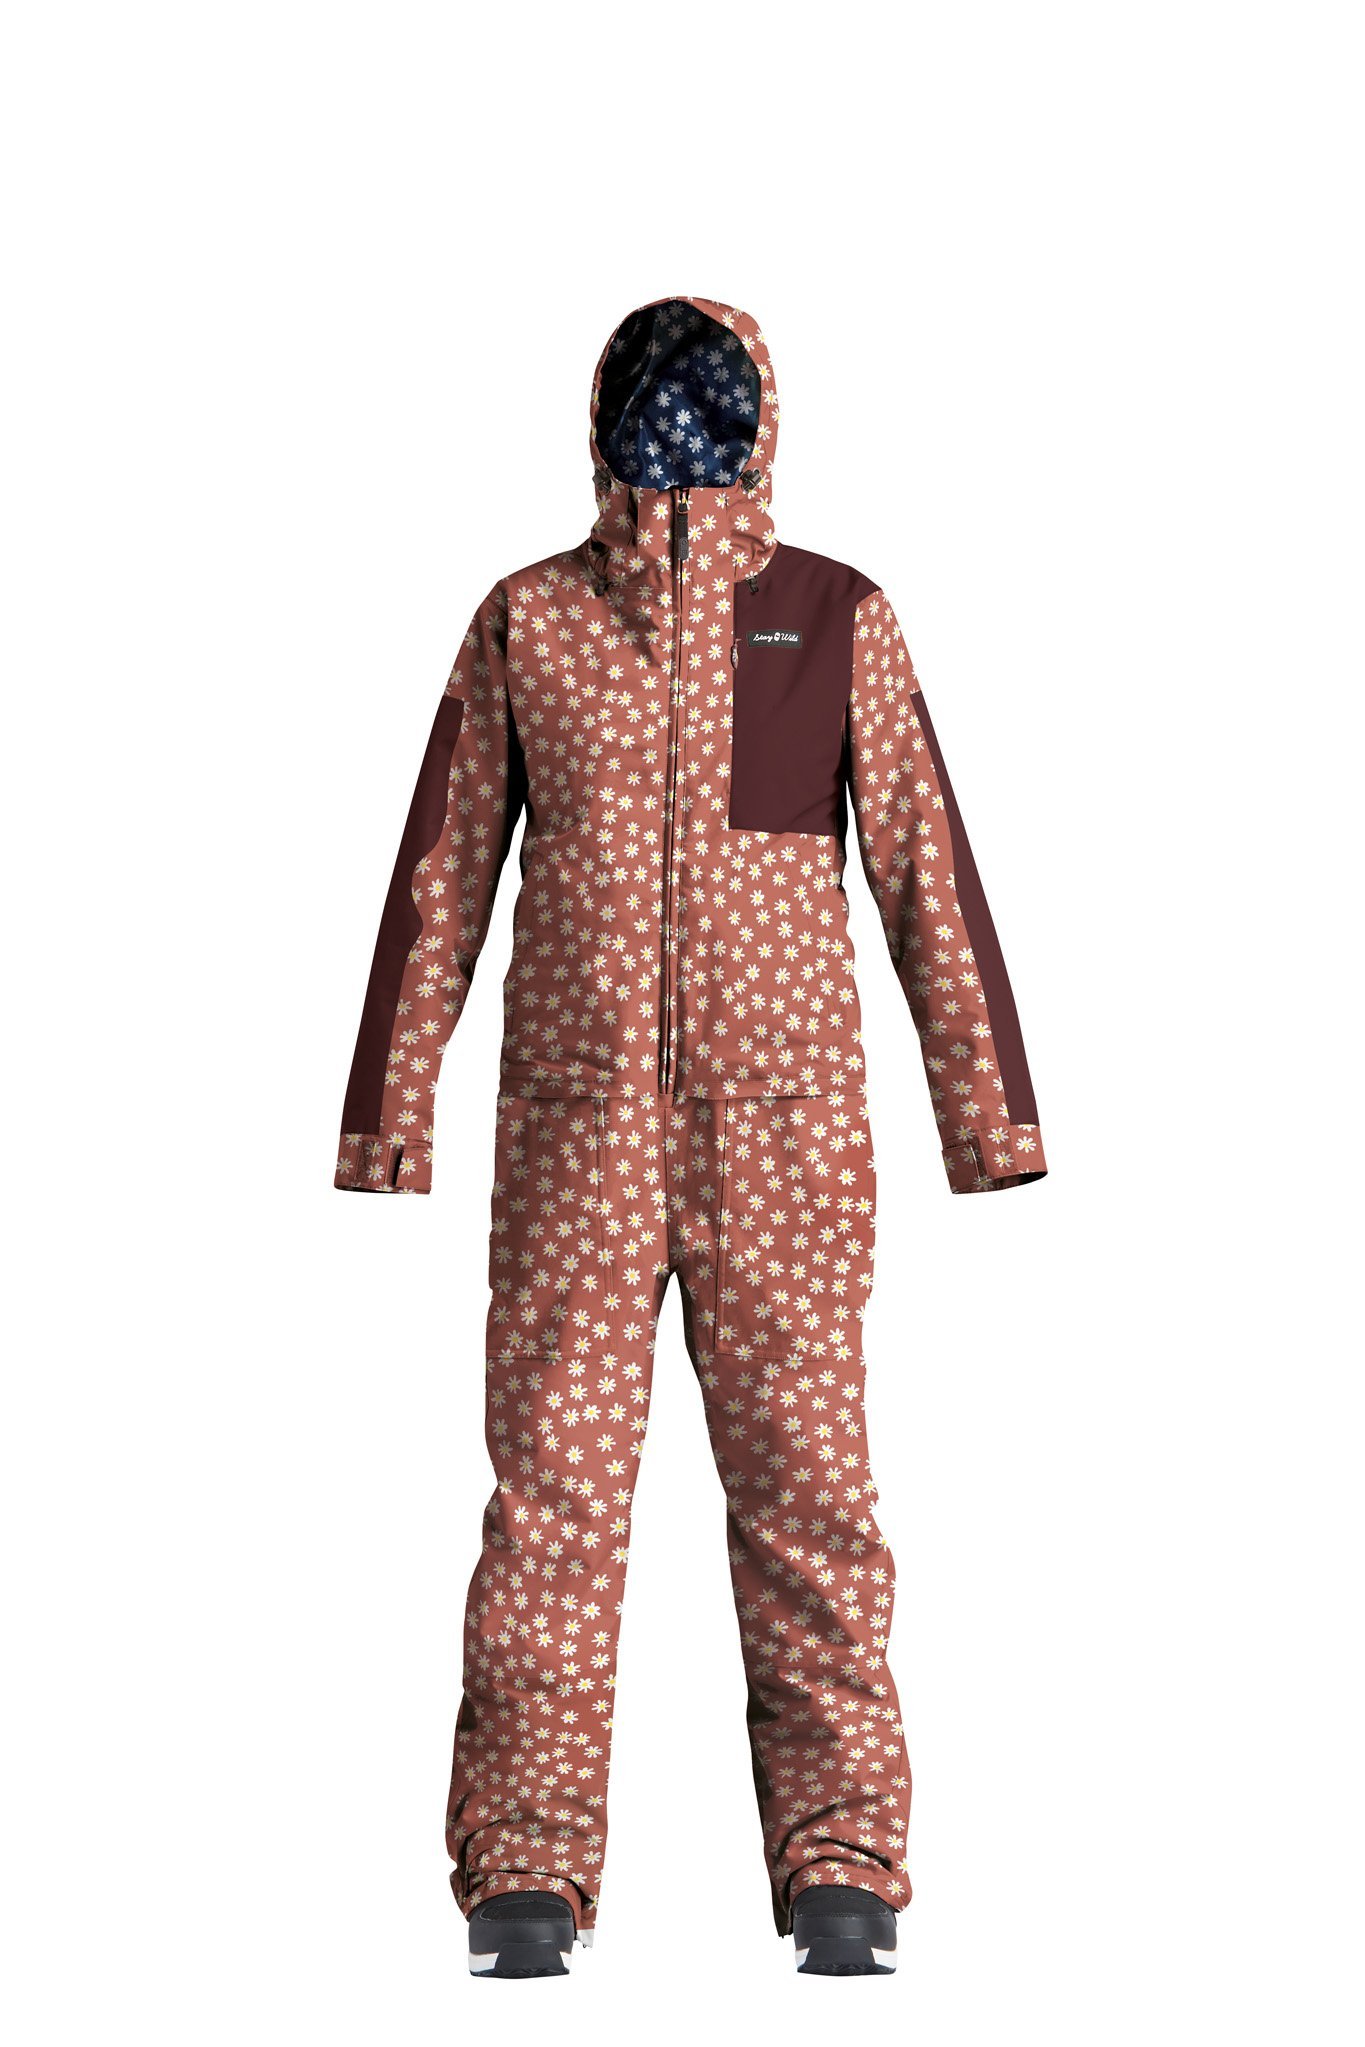 Airblaster Women's Stretch Freedom Suit onepiece rust daisy